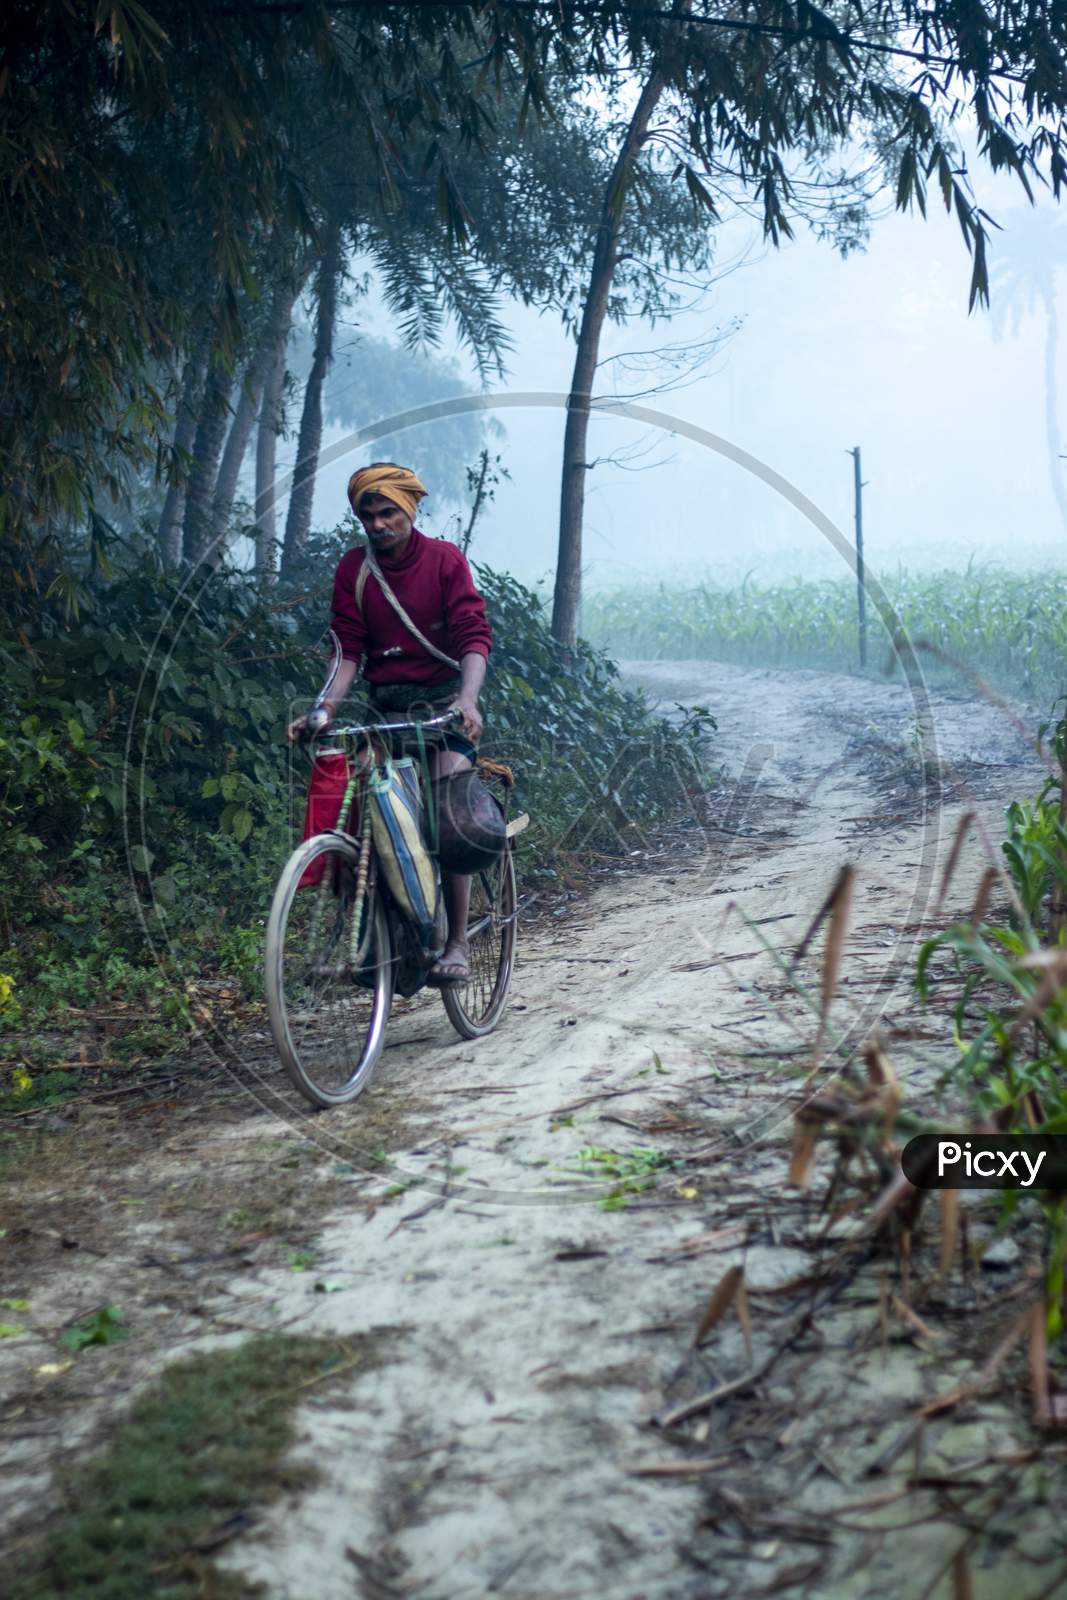 One Person Riding Cycle On Road Between The Forest Begusarai, Bihar, India 20-01-2021